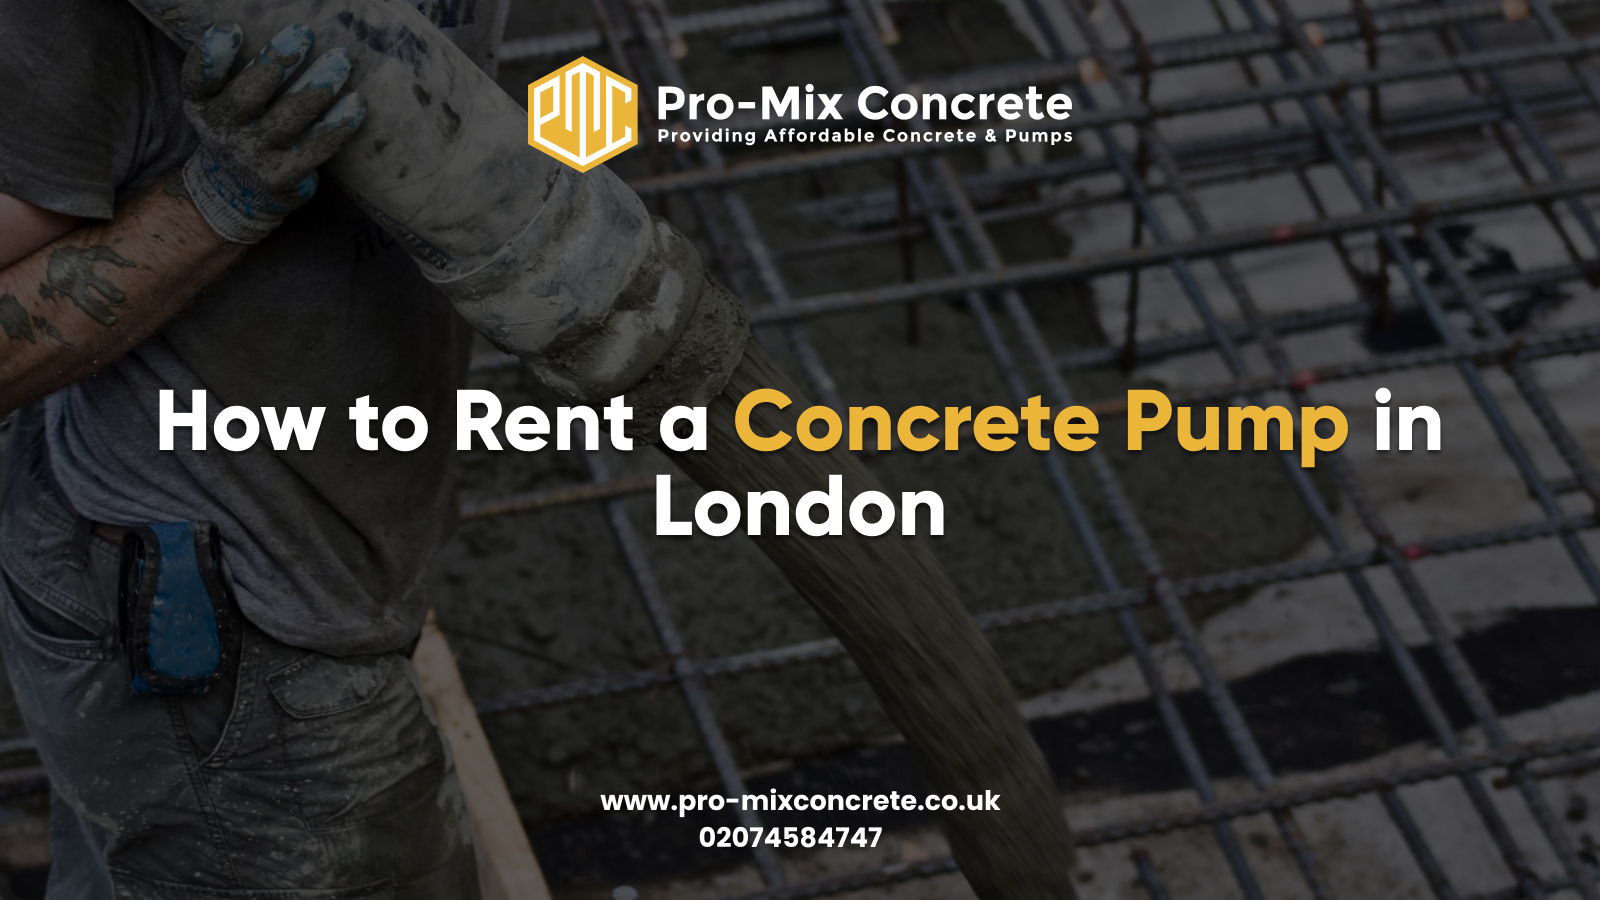 How to Rent a Concrete Pump in London